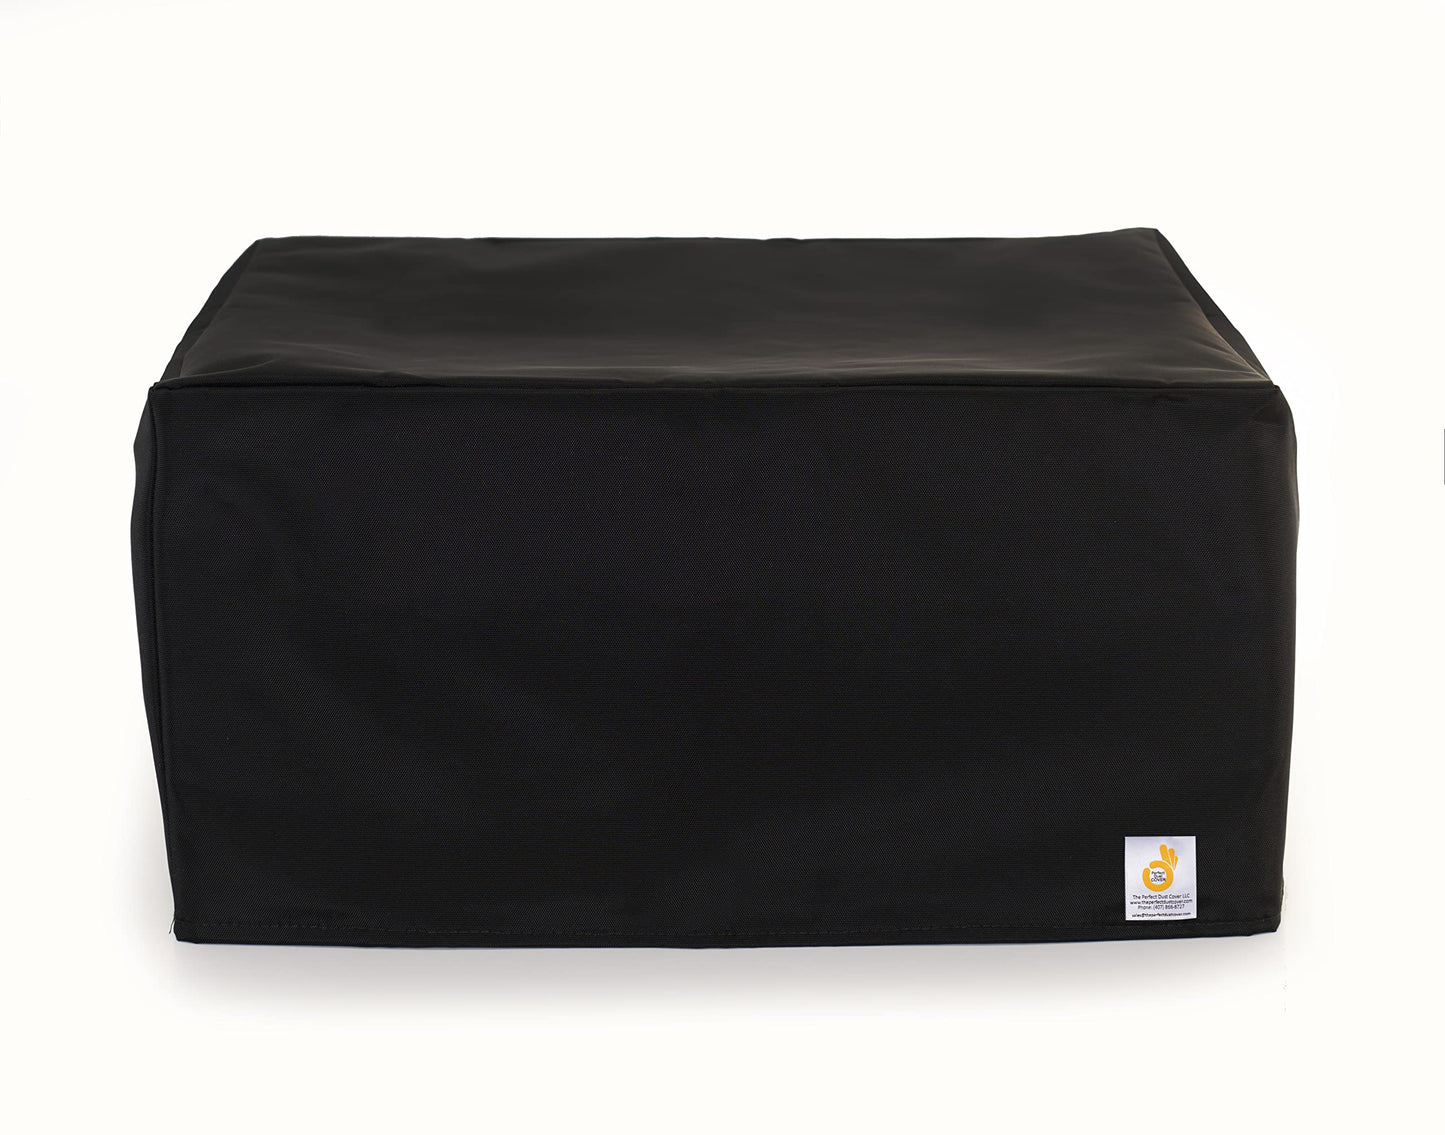 The Perfect Dust Cover, Black Nylon Cover Compatible with Brother MFC-L8900CDW Color Laser All-in-One Printer, Anti Static, Double Stitched and Waterproof Dust Cover by The Perfect Dust Cover LLC